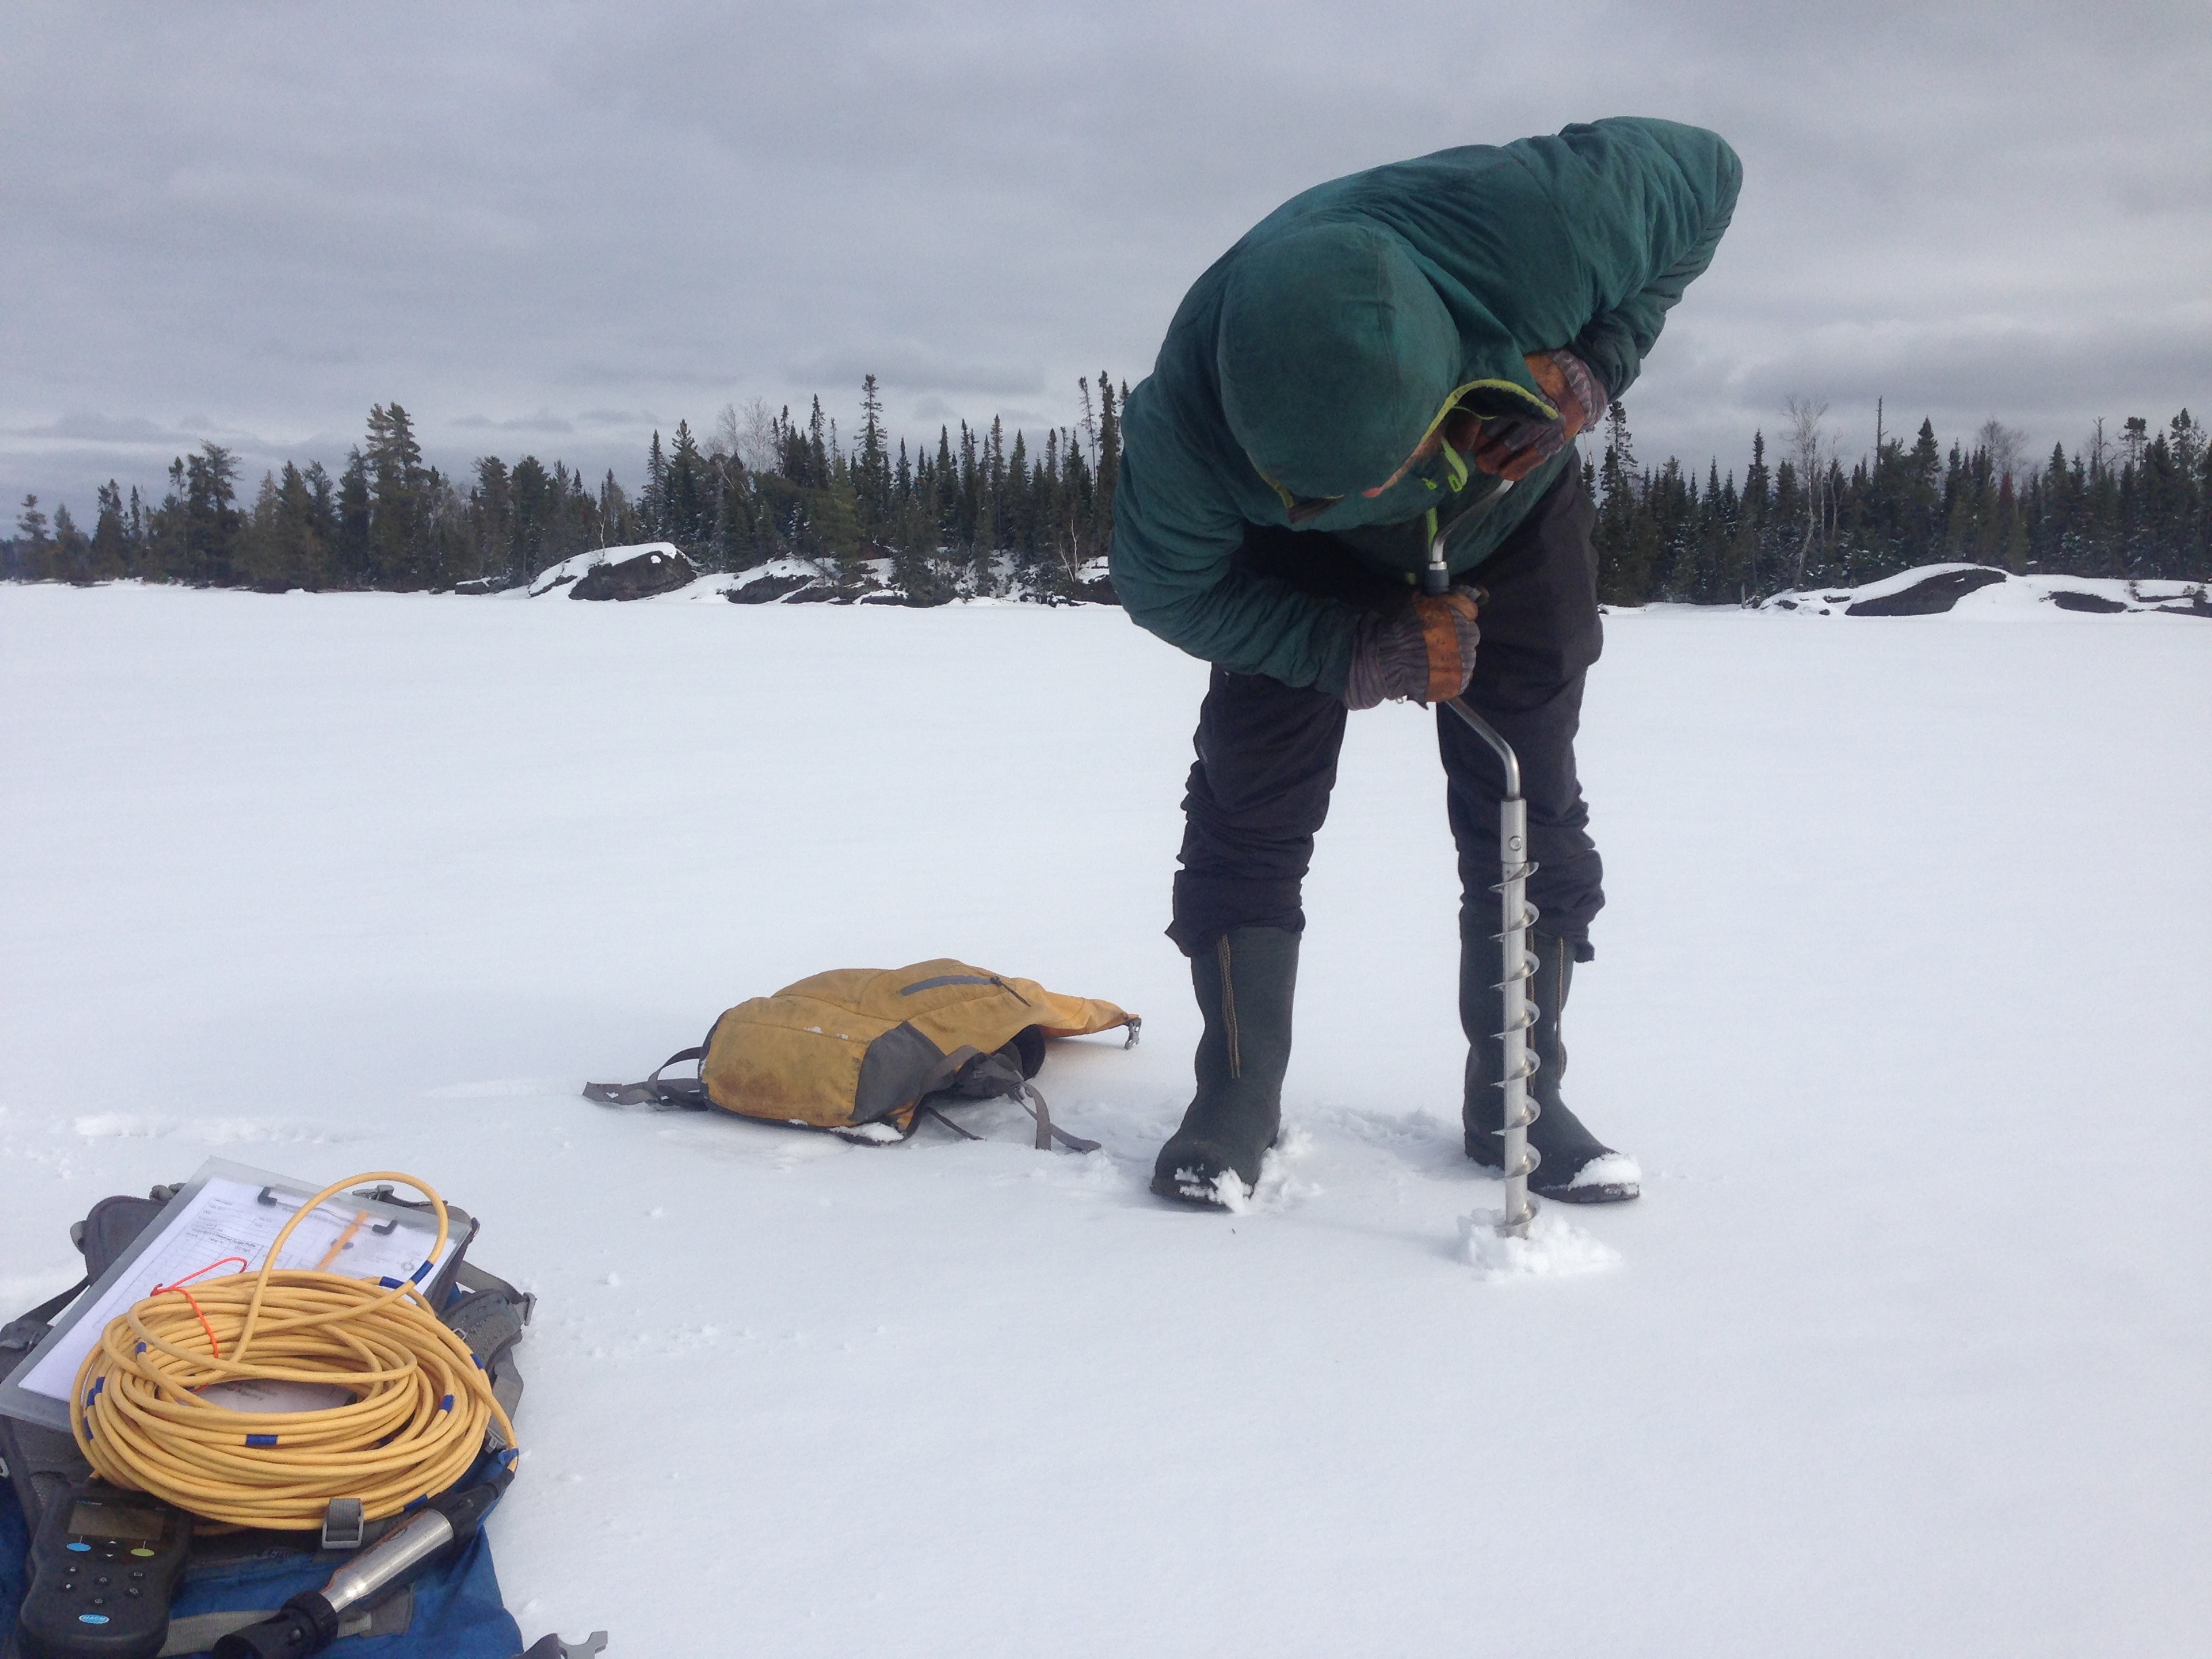 From the Freemans: Water Quality Testing of Boundary Waters Lakes